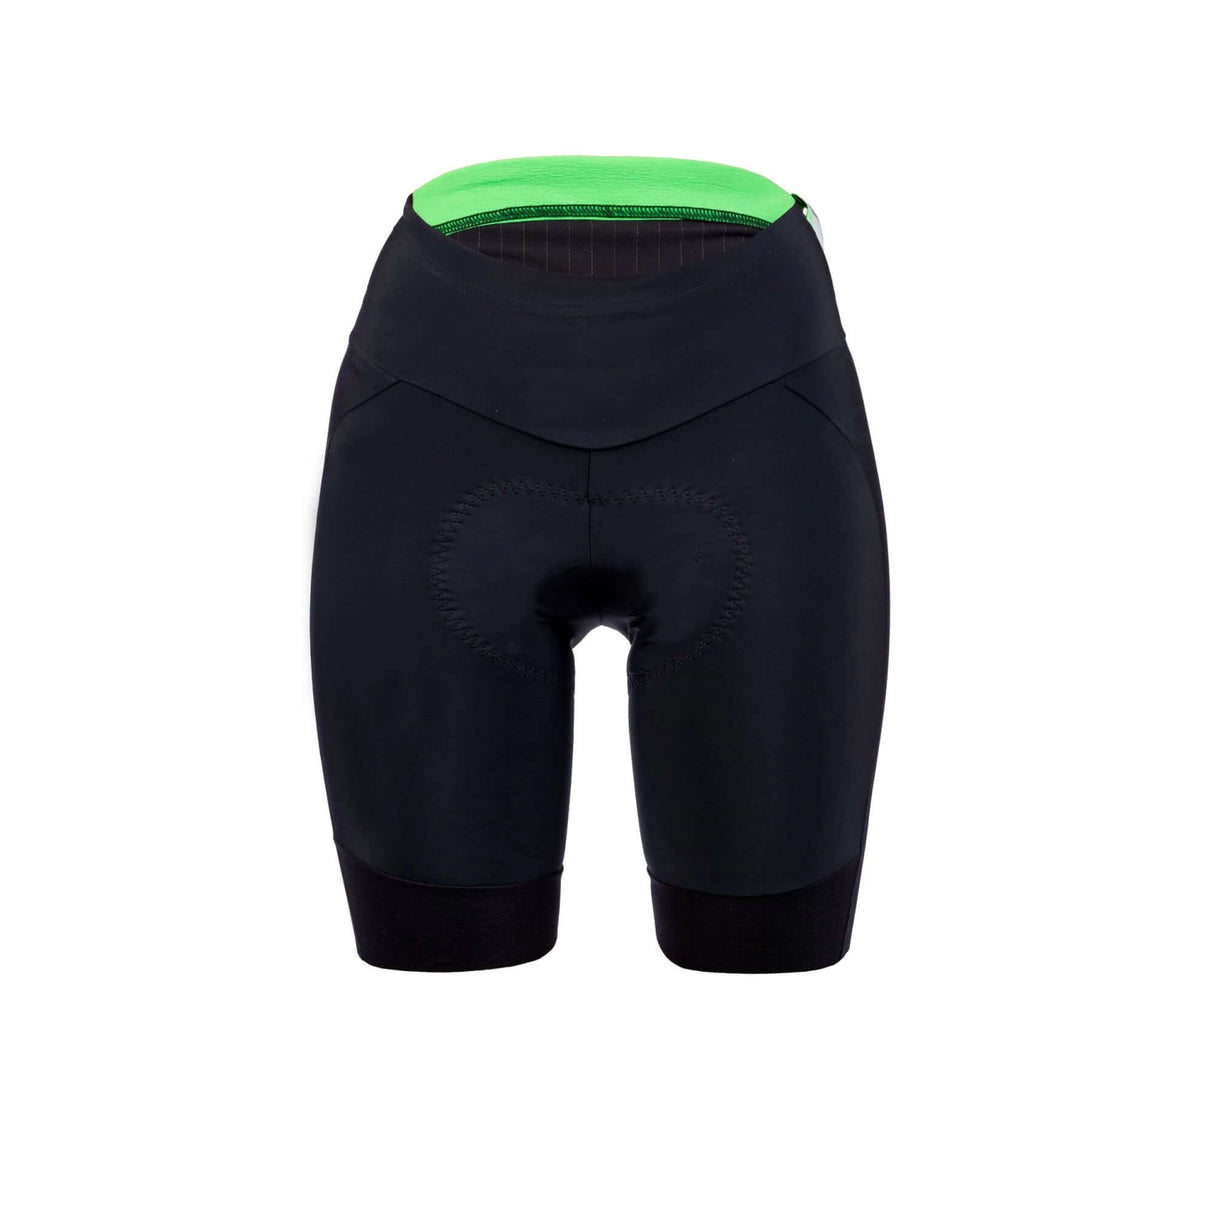 Q36.5 Essential Half Shorts Women | Strictly Bicycles